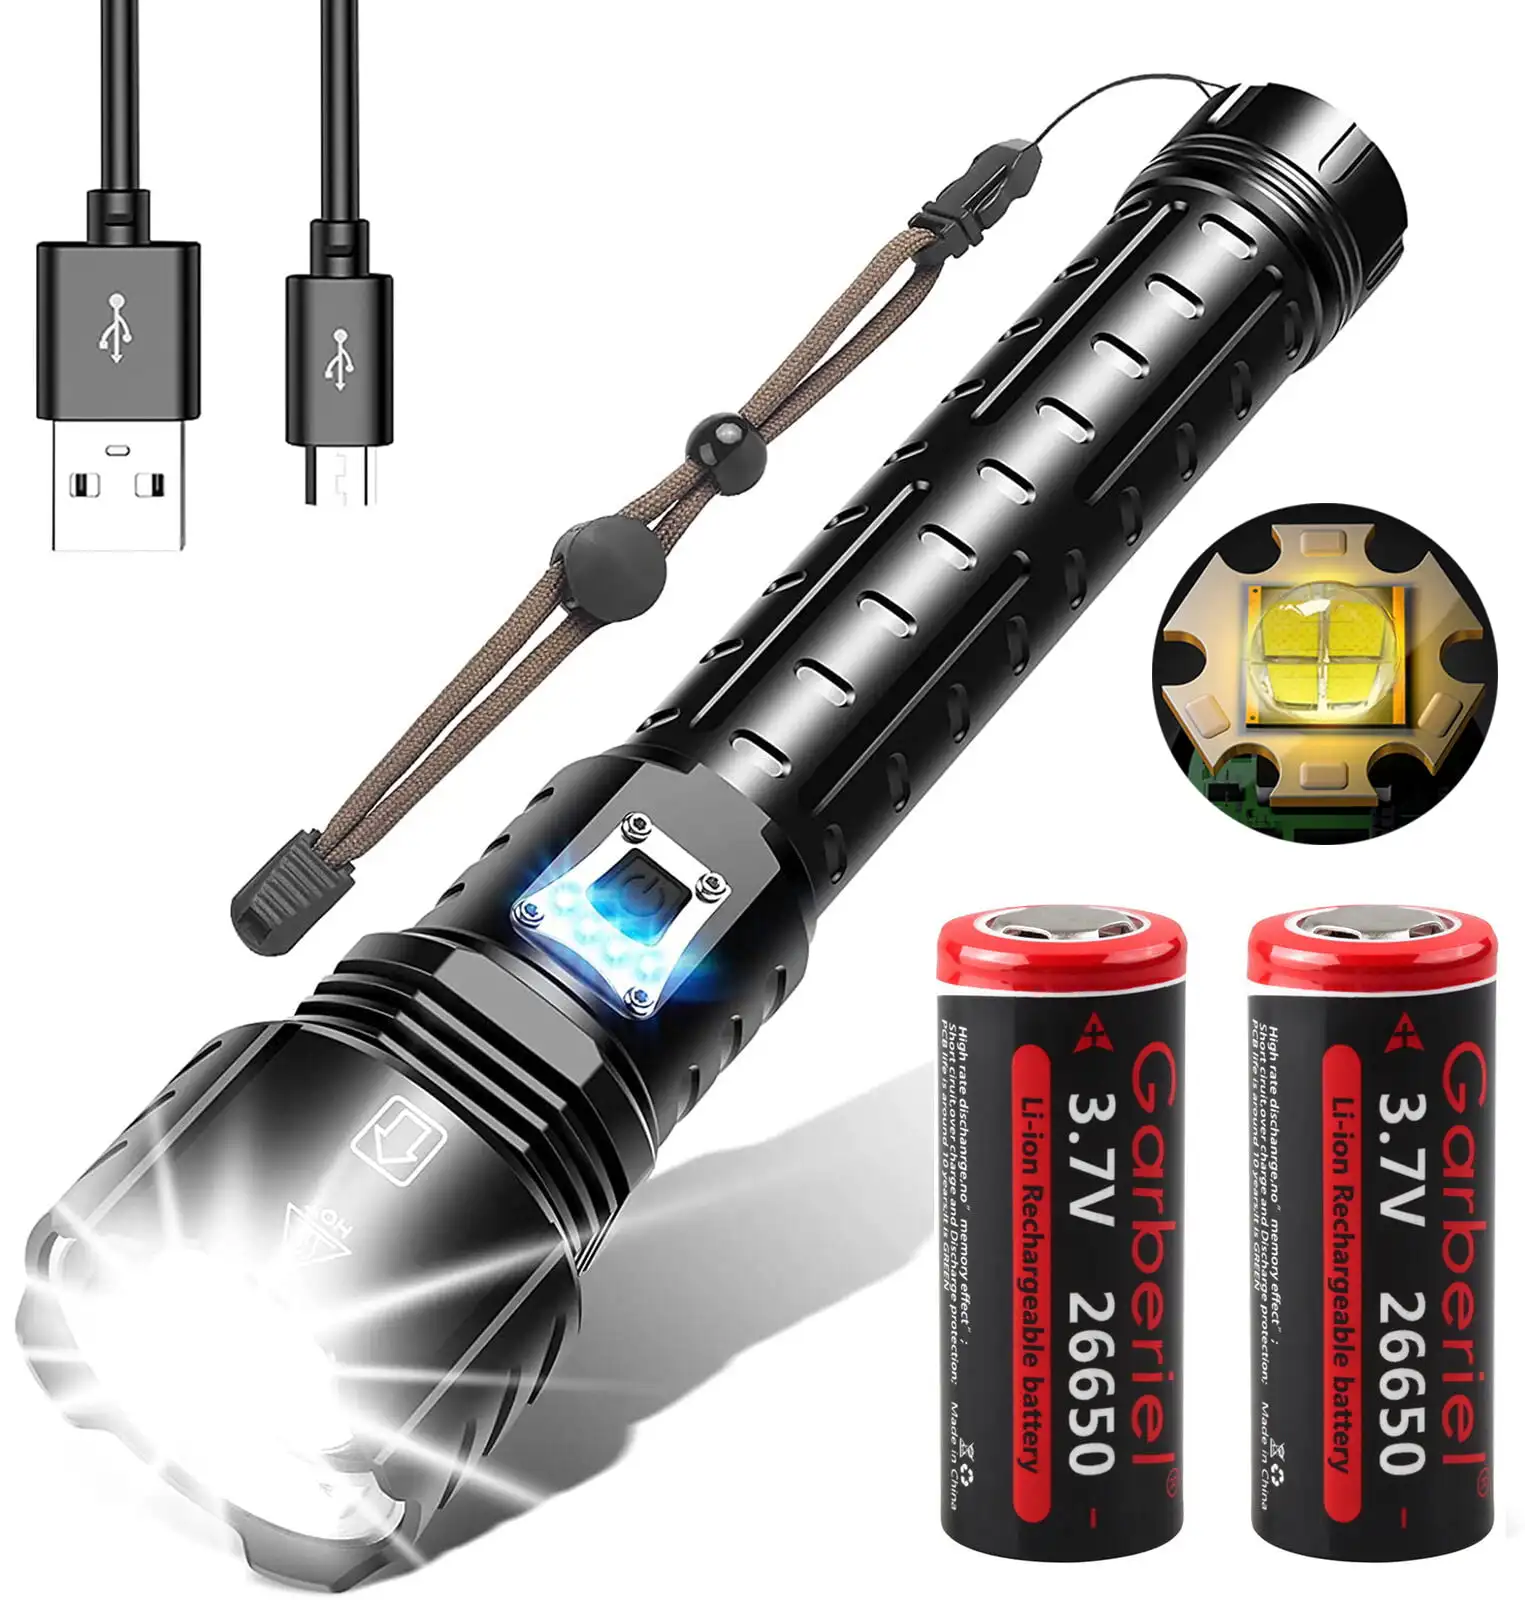 

XHP90.2 Super Bright 120000Lumens LED Zoomable Flashlight USB Rechargeable Waterproof Tactical Torch with 2PCS 26650 Batteries f